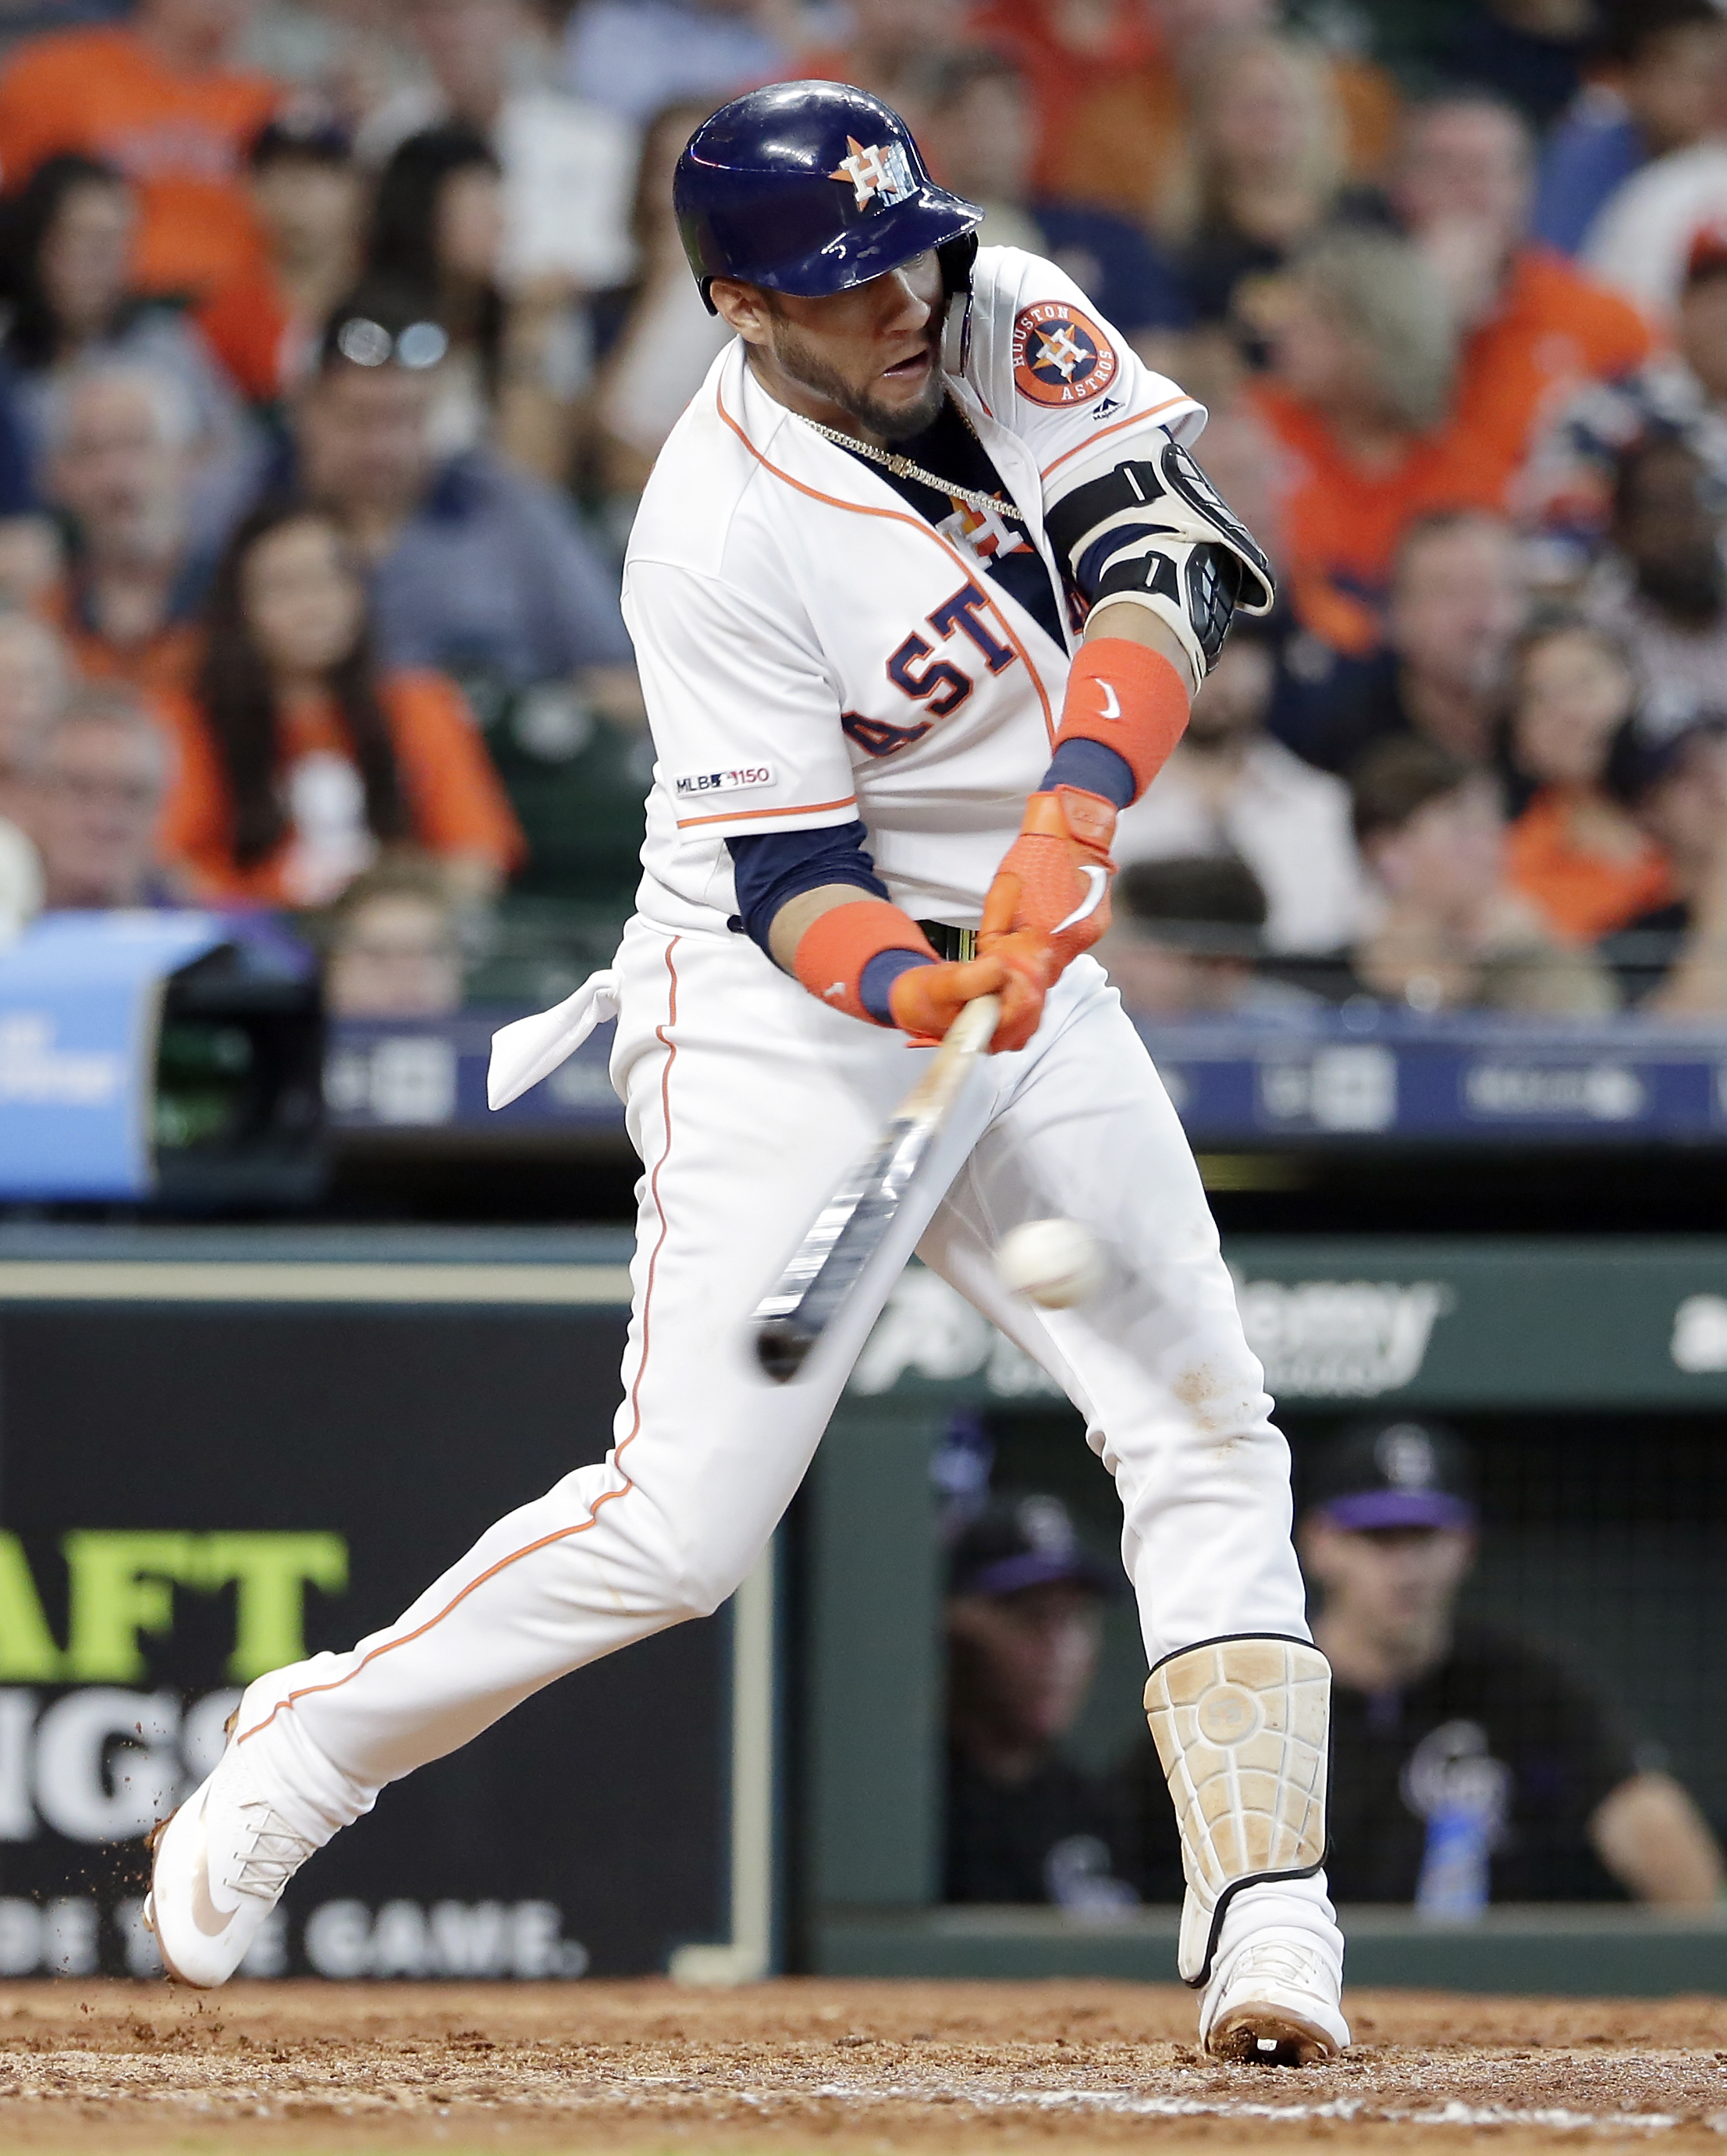 Gurriel 8 RBIs, Cole wins 10th in row, Astros rout Rockies